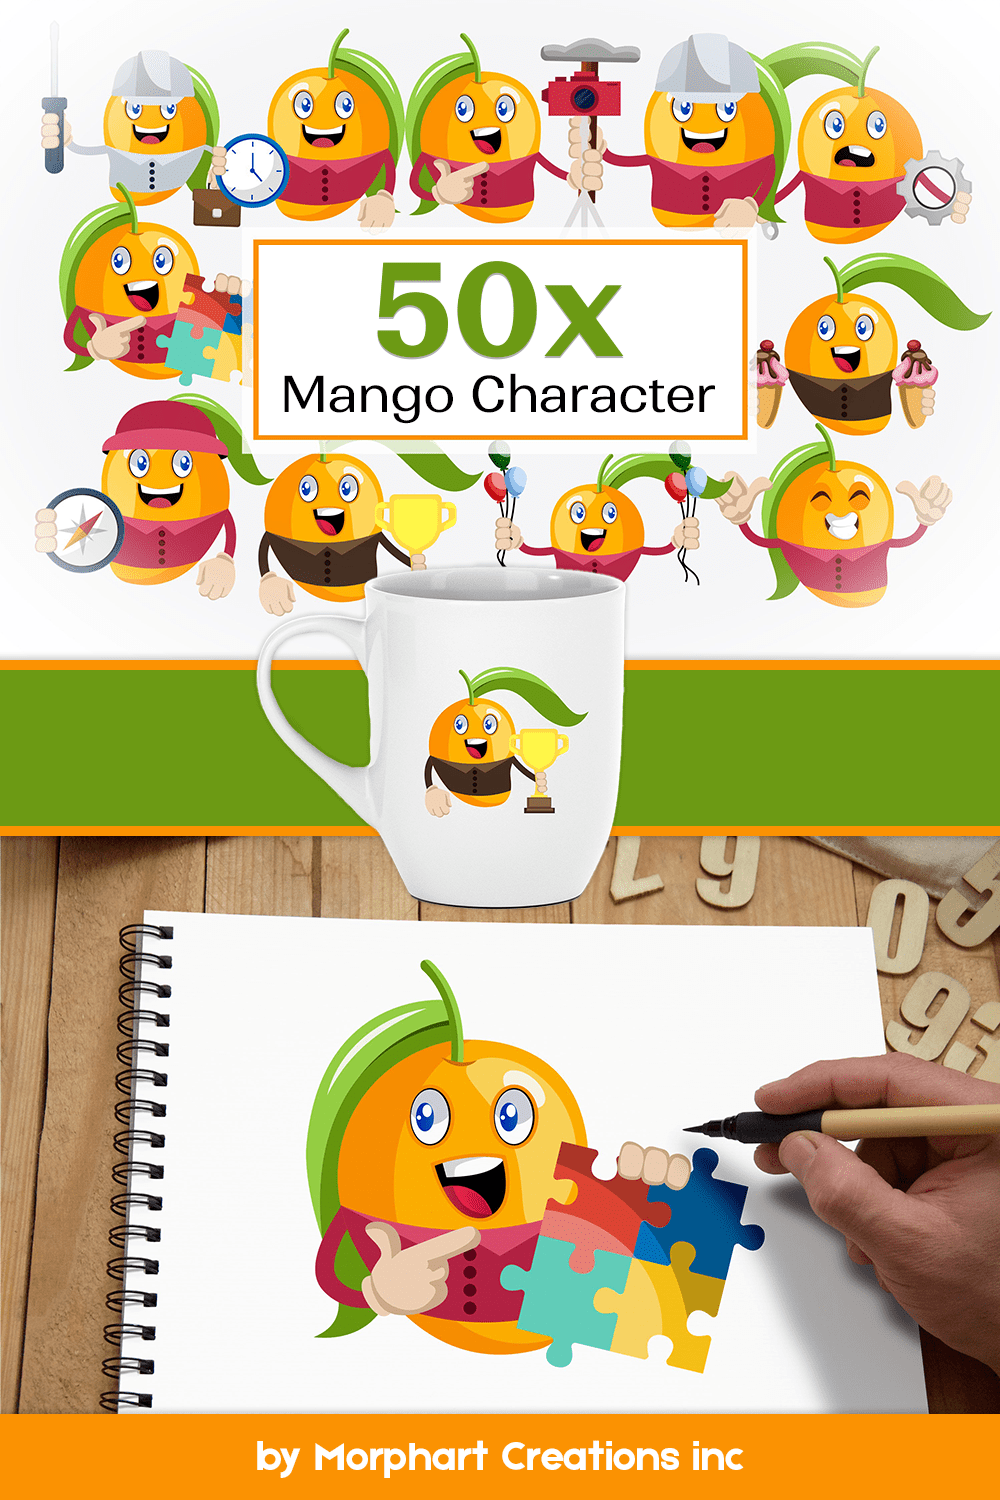 50x mango character - pinterest image preview.